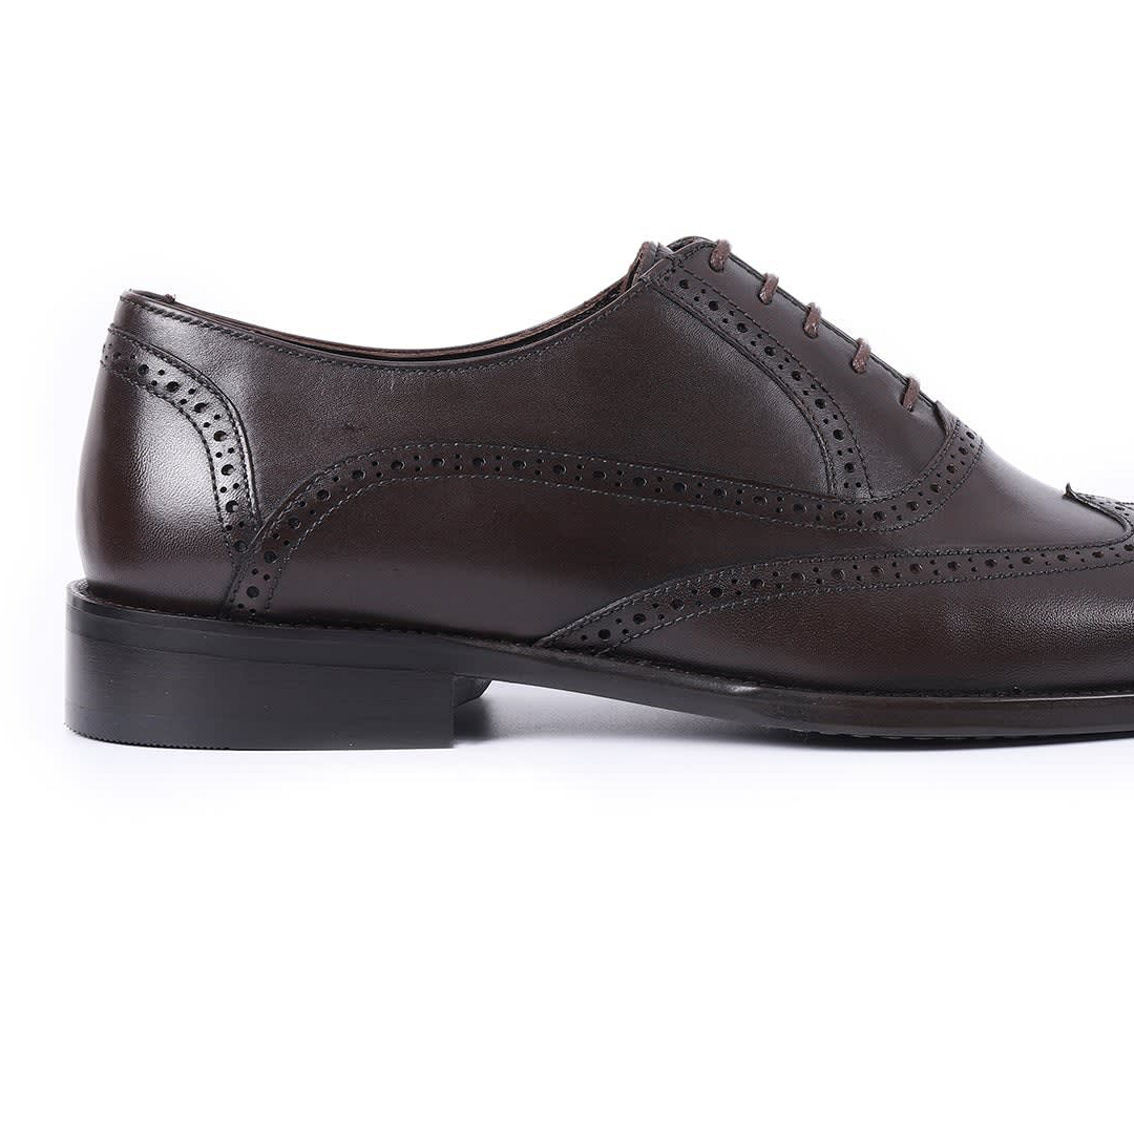 VellaPais Anderson Wingtip Dress Shoes - Image 2 of 2